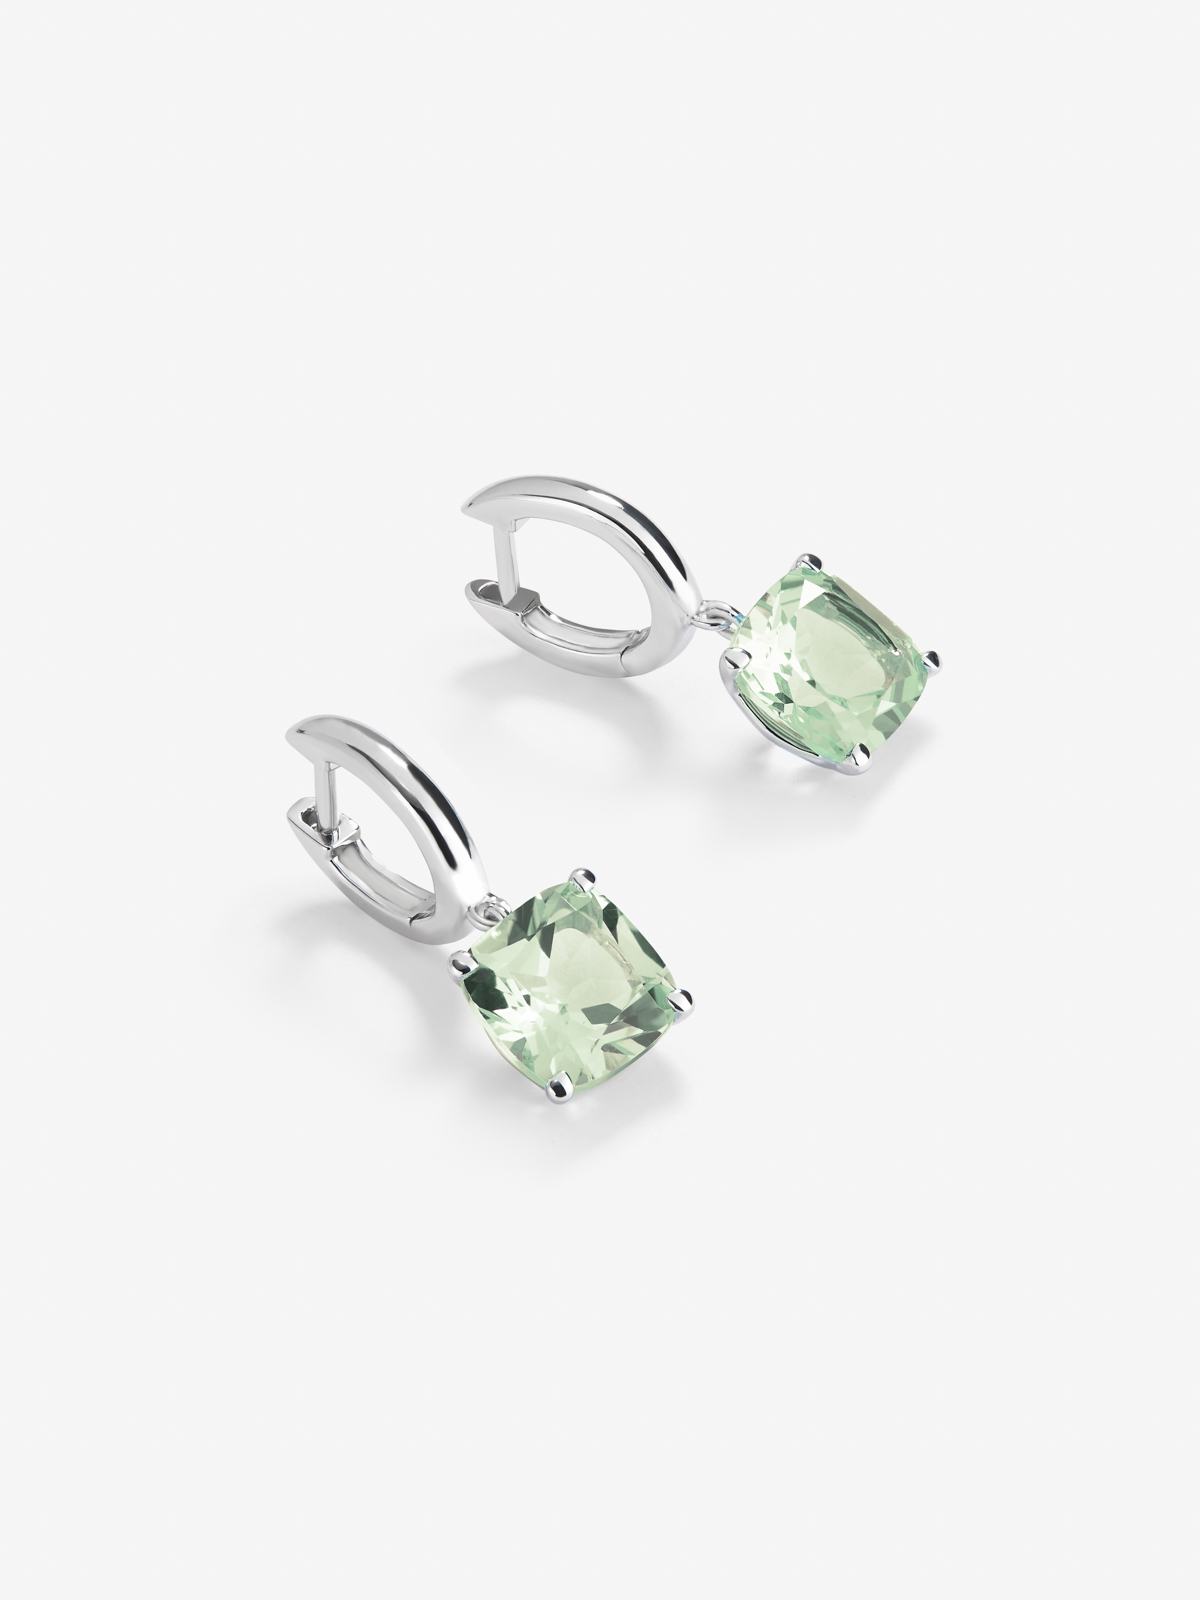 925 silver earrings with green amethists in 5.3 cts Cushion